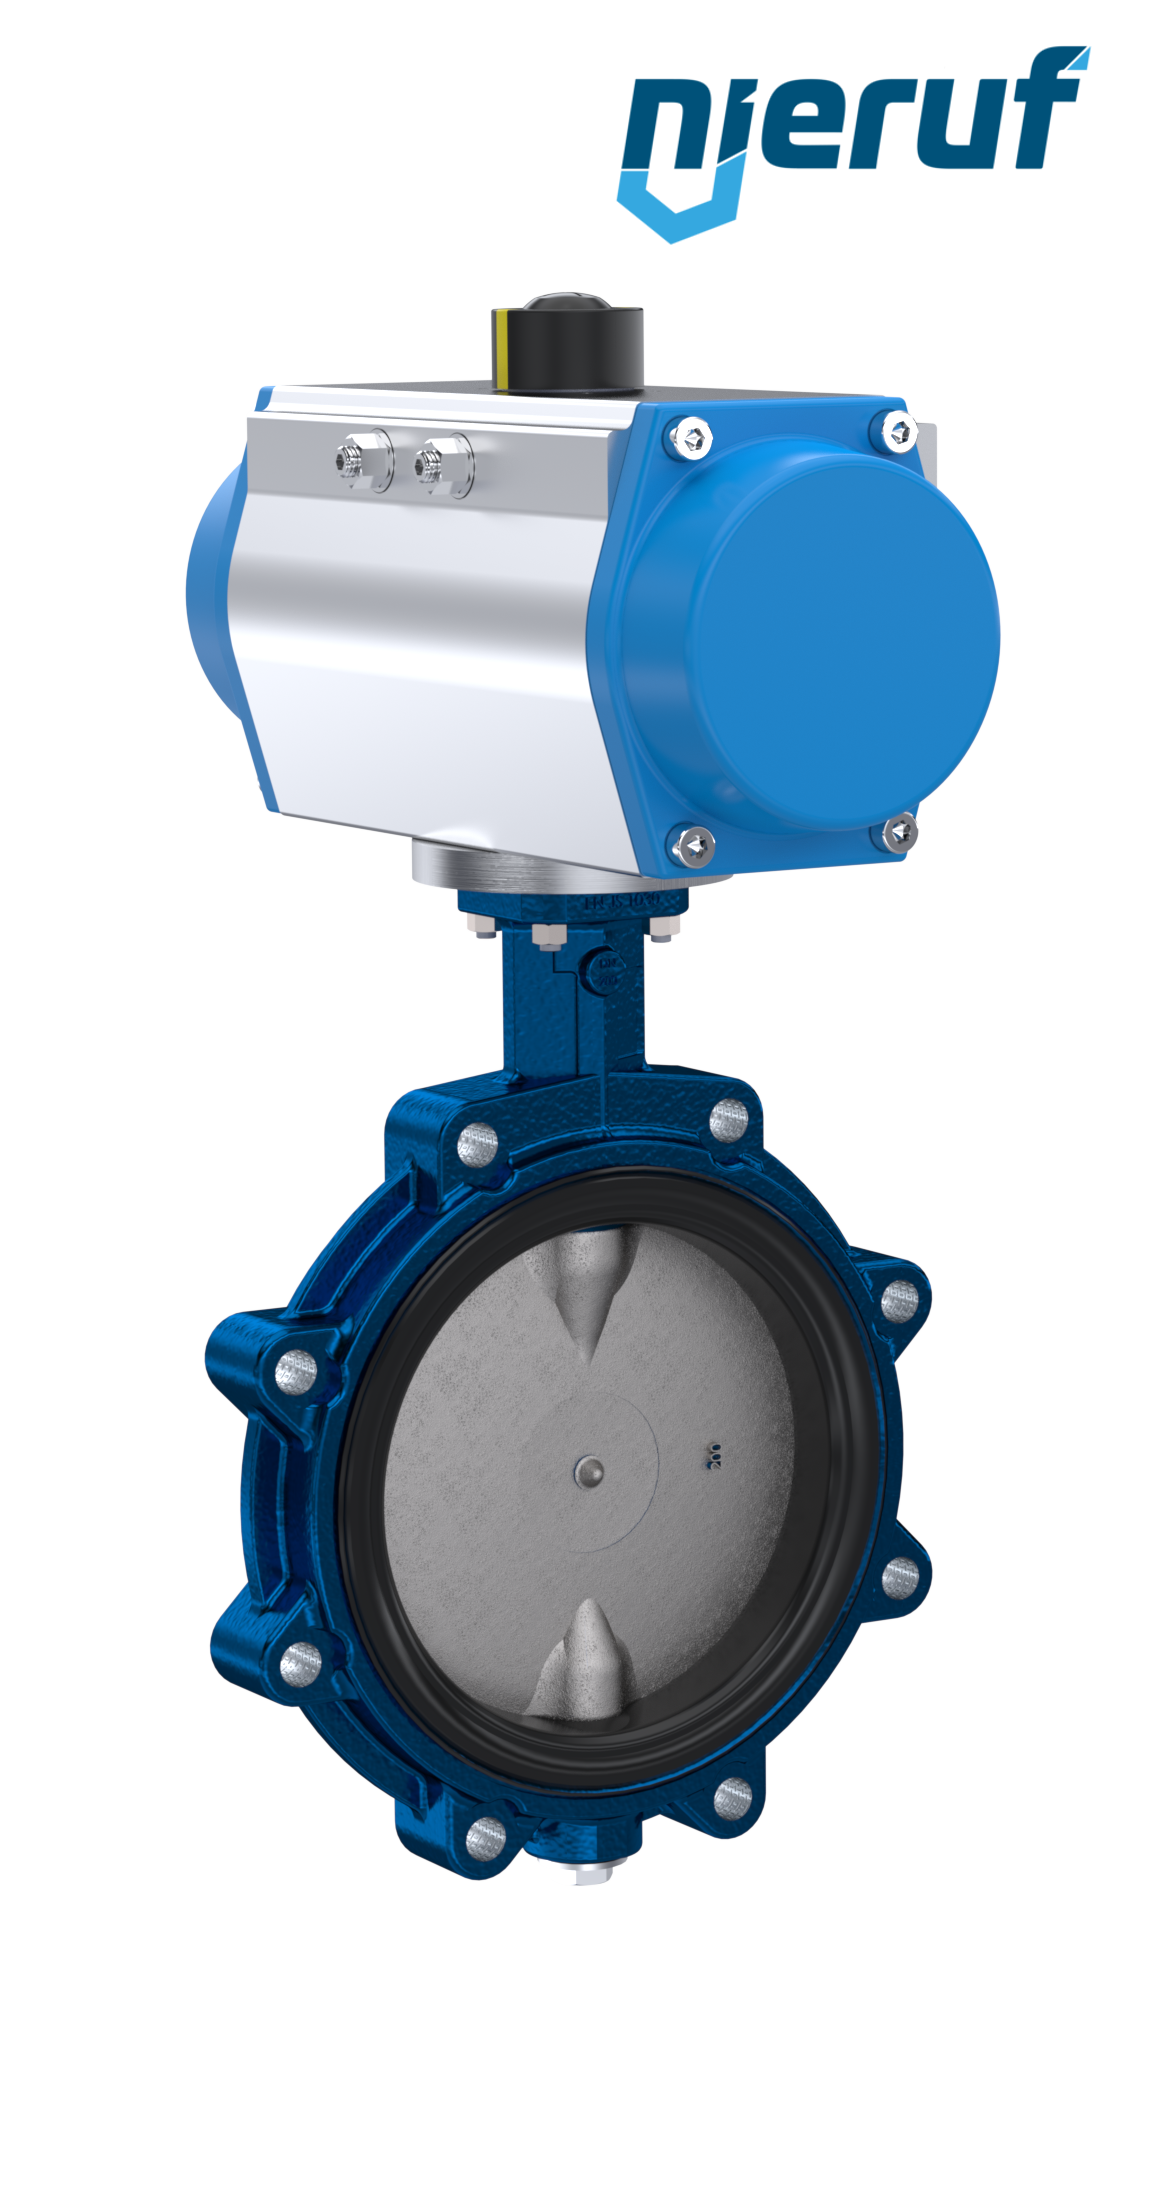 Butterfly valve DN 80 AK02 EPDM DVGW drinking water, WRAS, ACS, W270 pneumatic actuator single acting